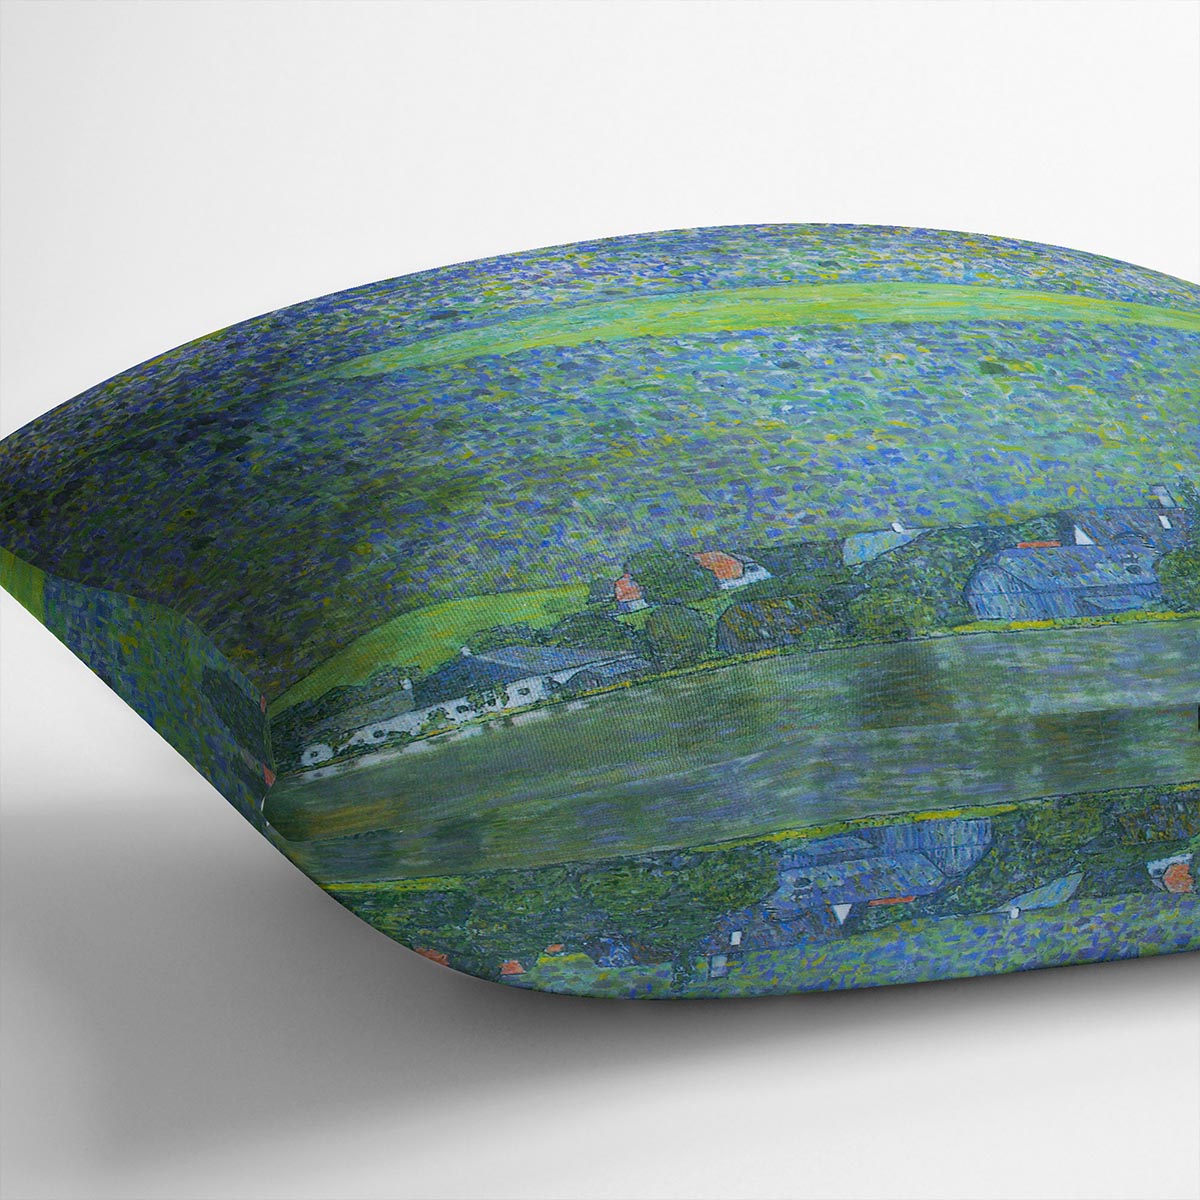 Unterach at the Attersee by Klimt Cushion